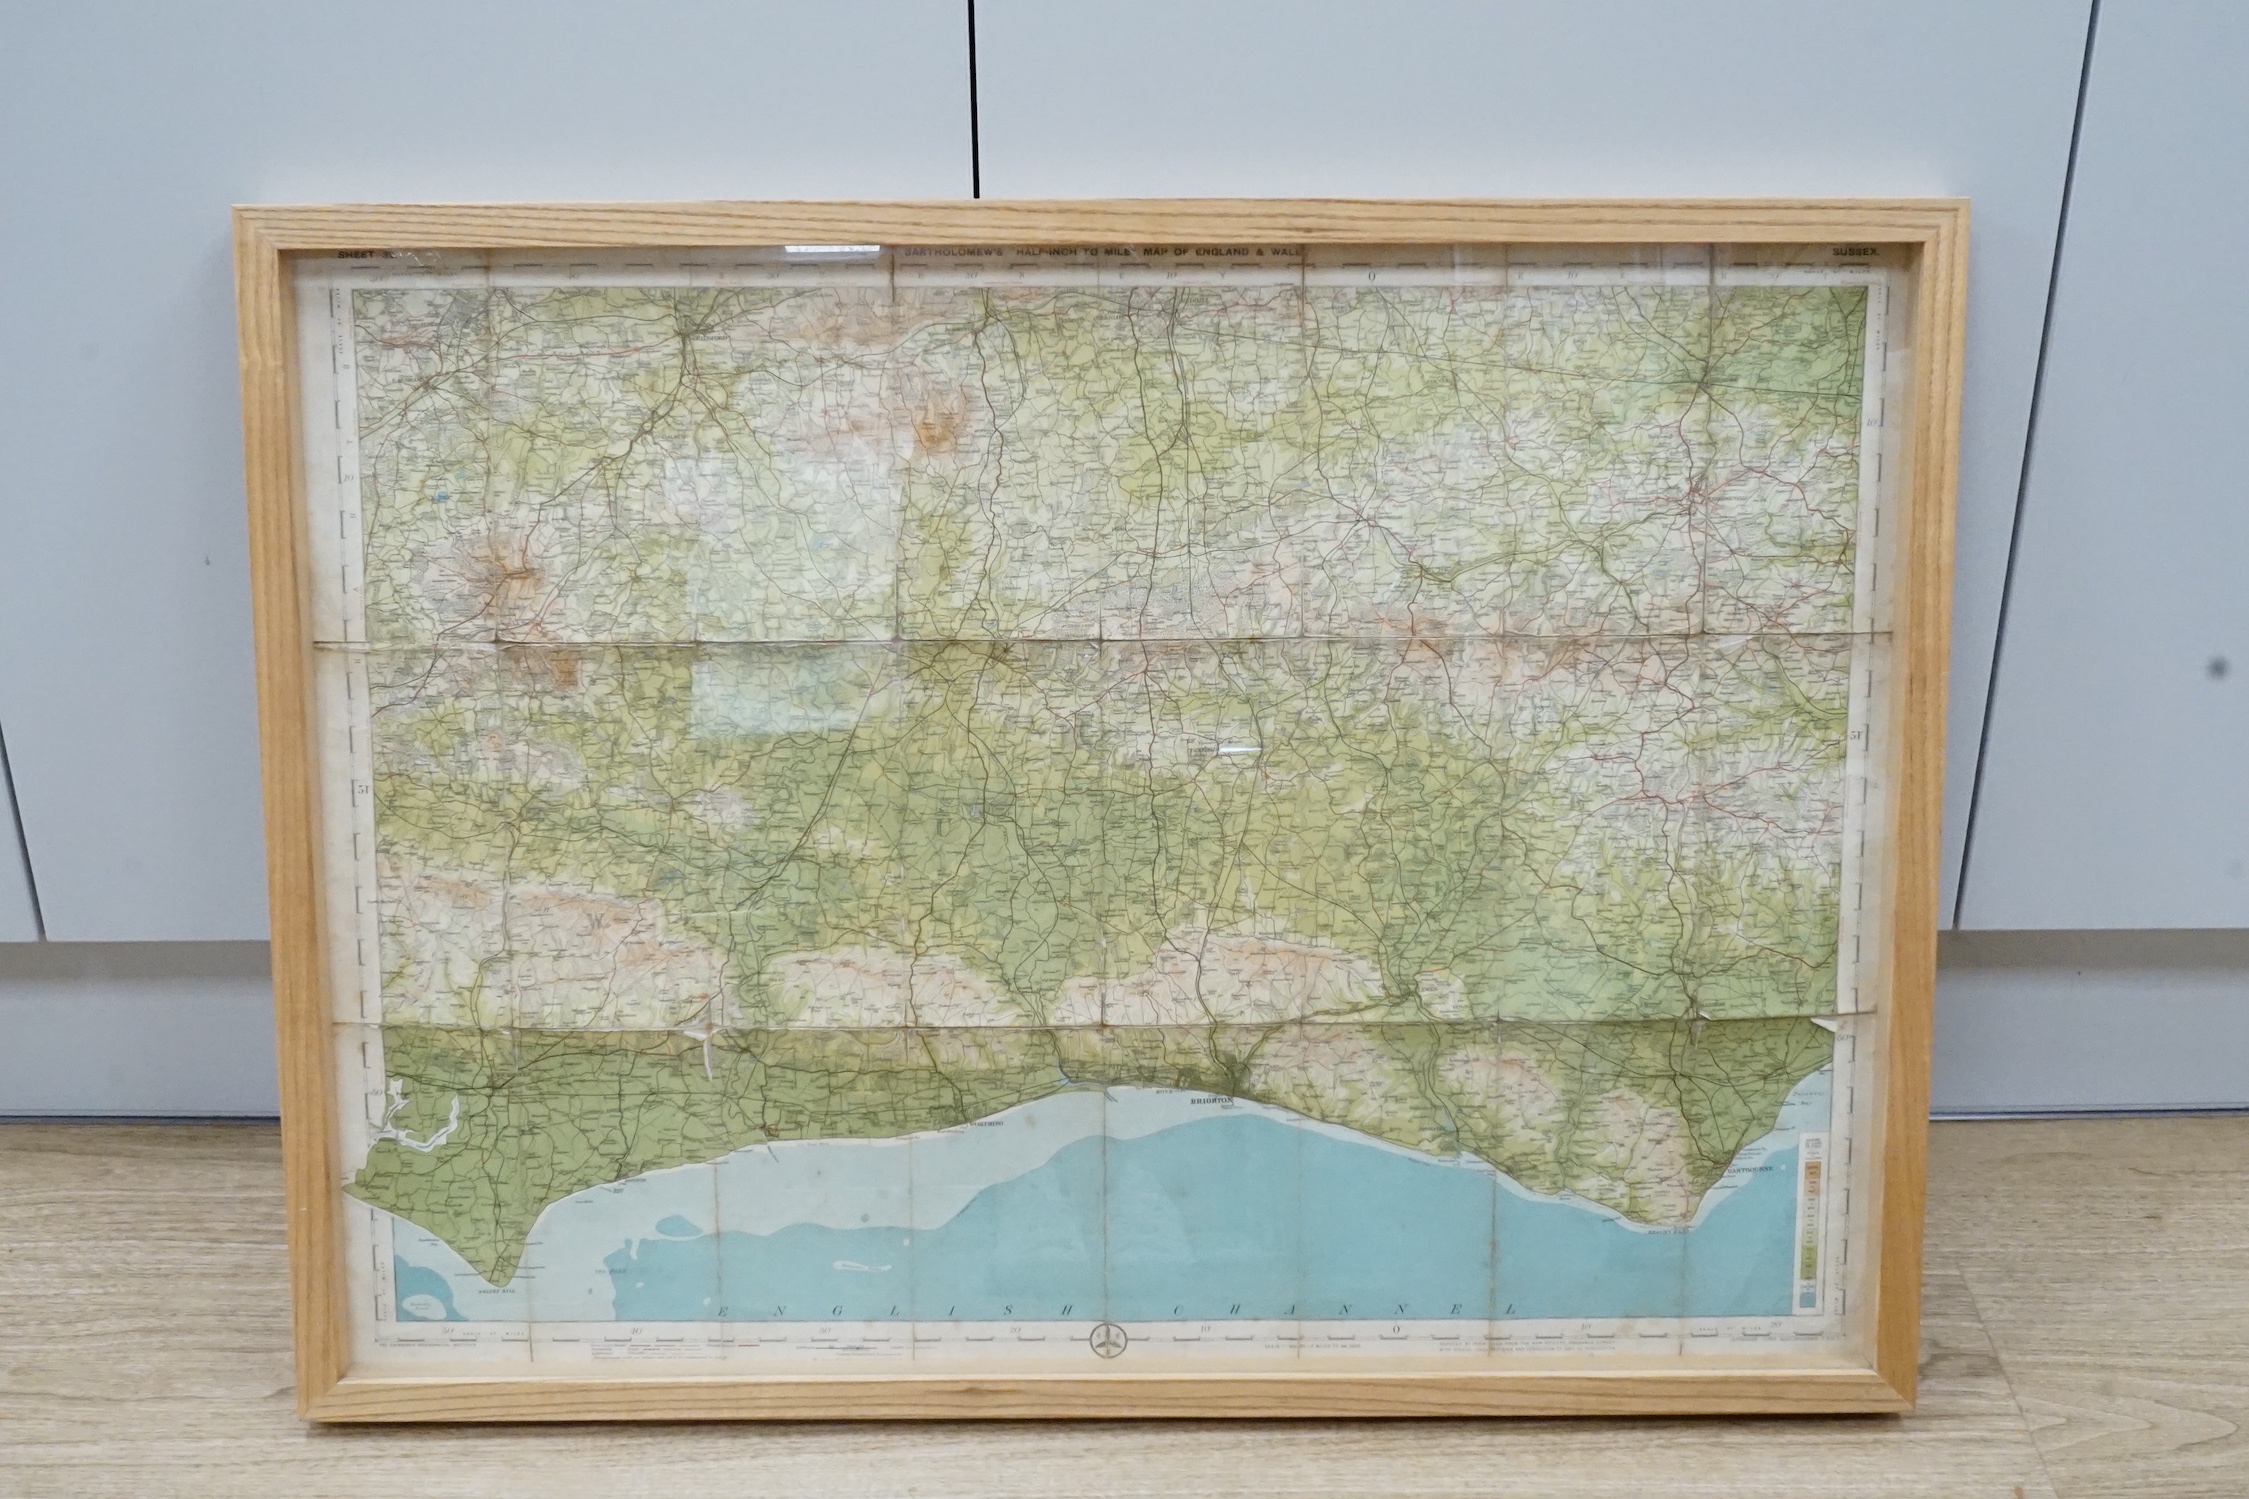 John Bartholomew's New Reduced Survey, coloured engraving, ½ inch to mile map of England and Wales - Sussex, 54 x 73cm